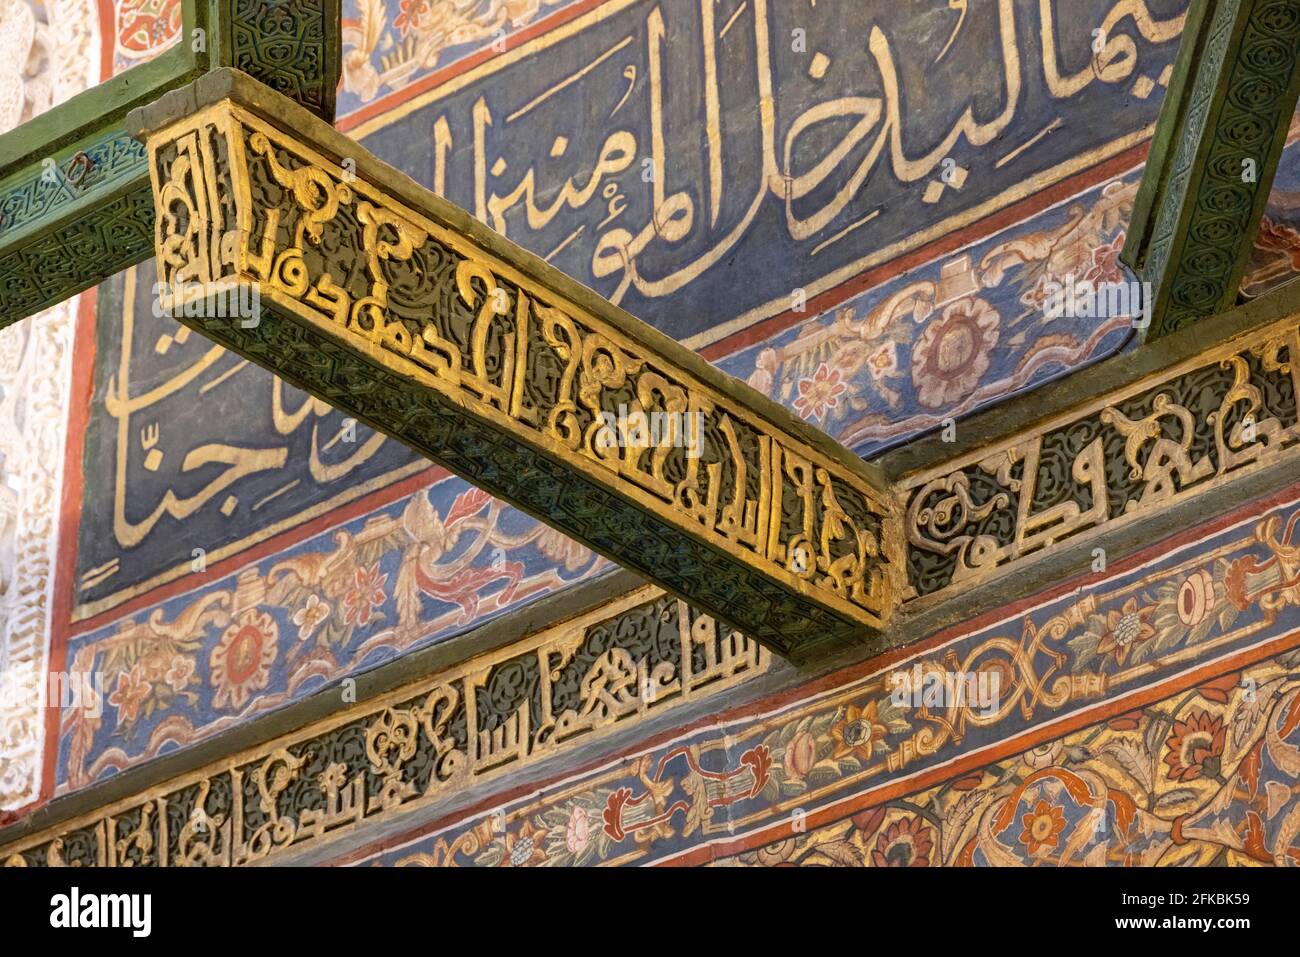 detail of Kufic on wooden beam, Tomb of Imam al-Shafi'i, Cairo, Egypt Stock Photo